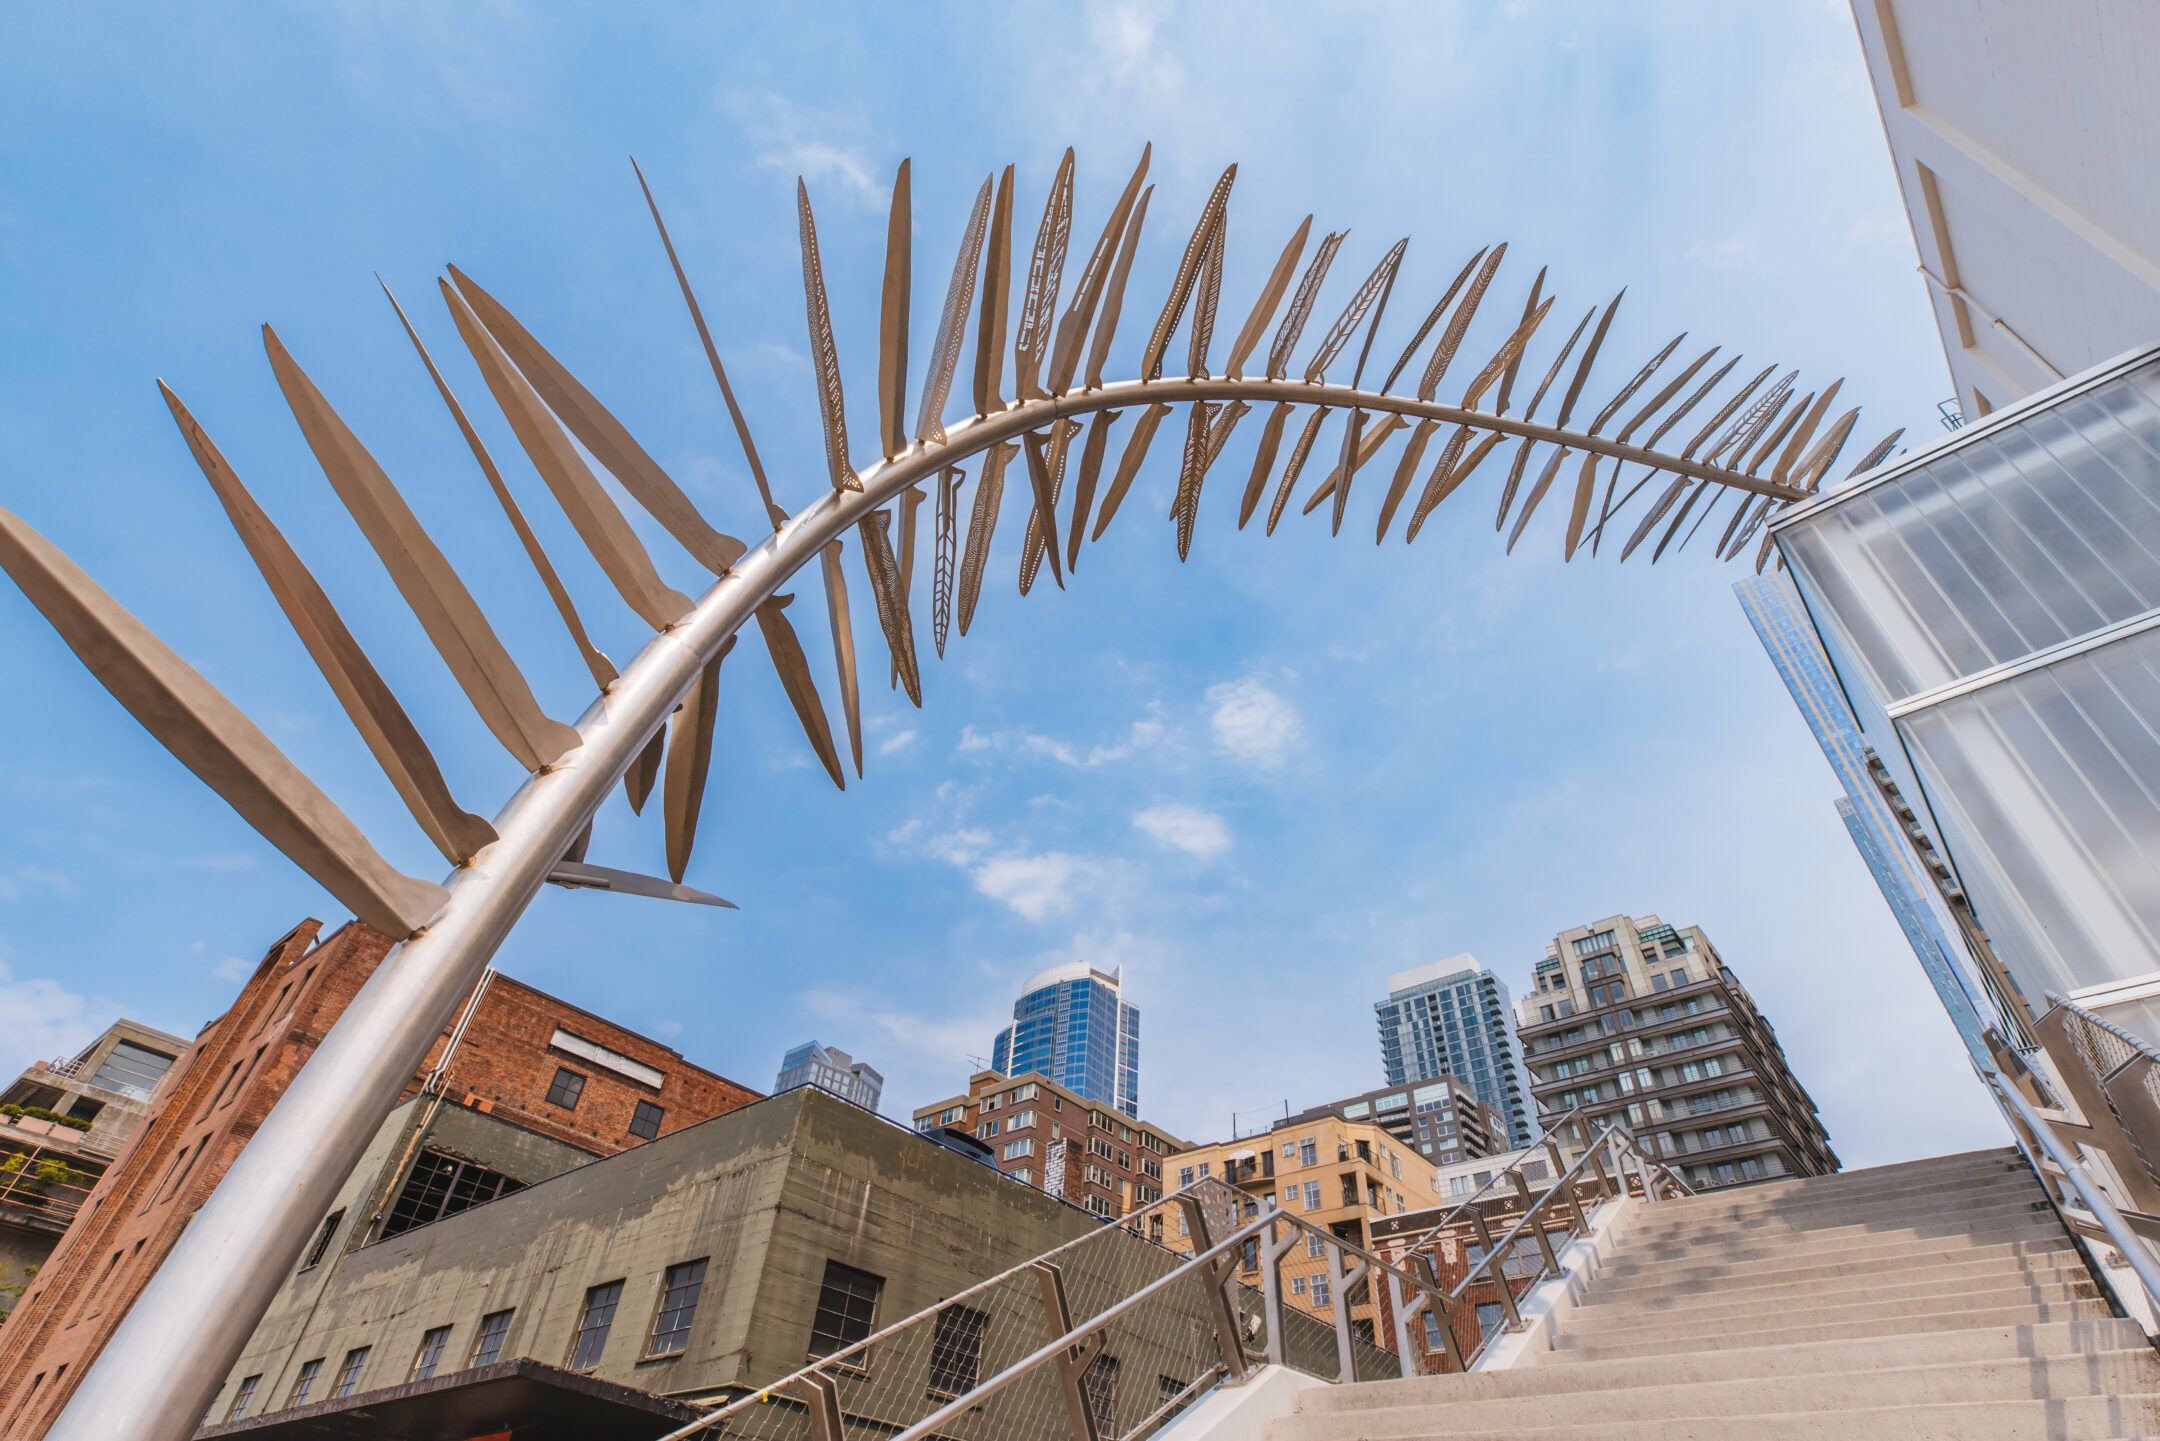 A worm's eye view photo of a fern-like sculpture arching over the Union Street Pedestrian Bridge steps.